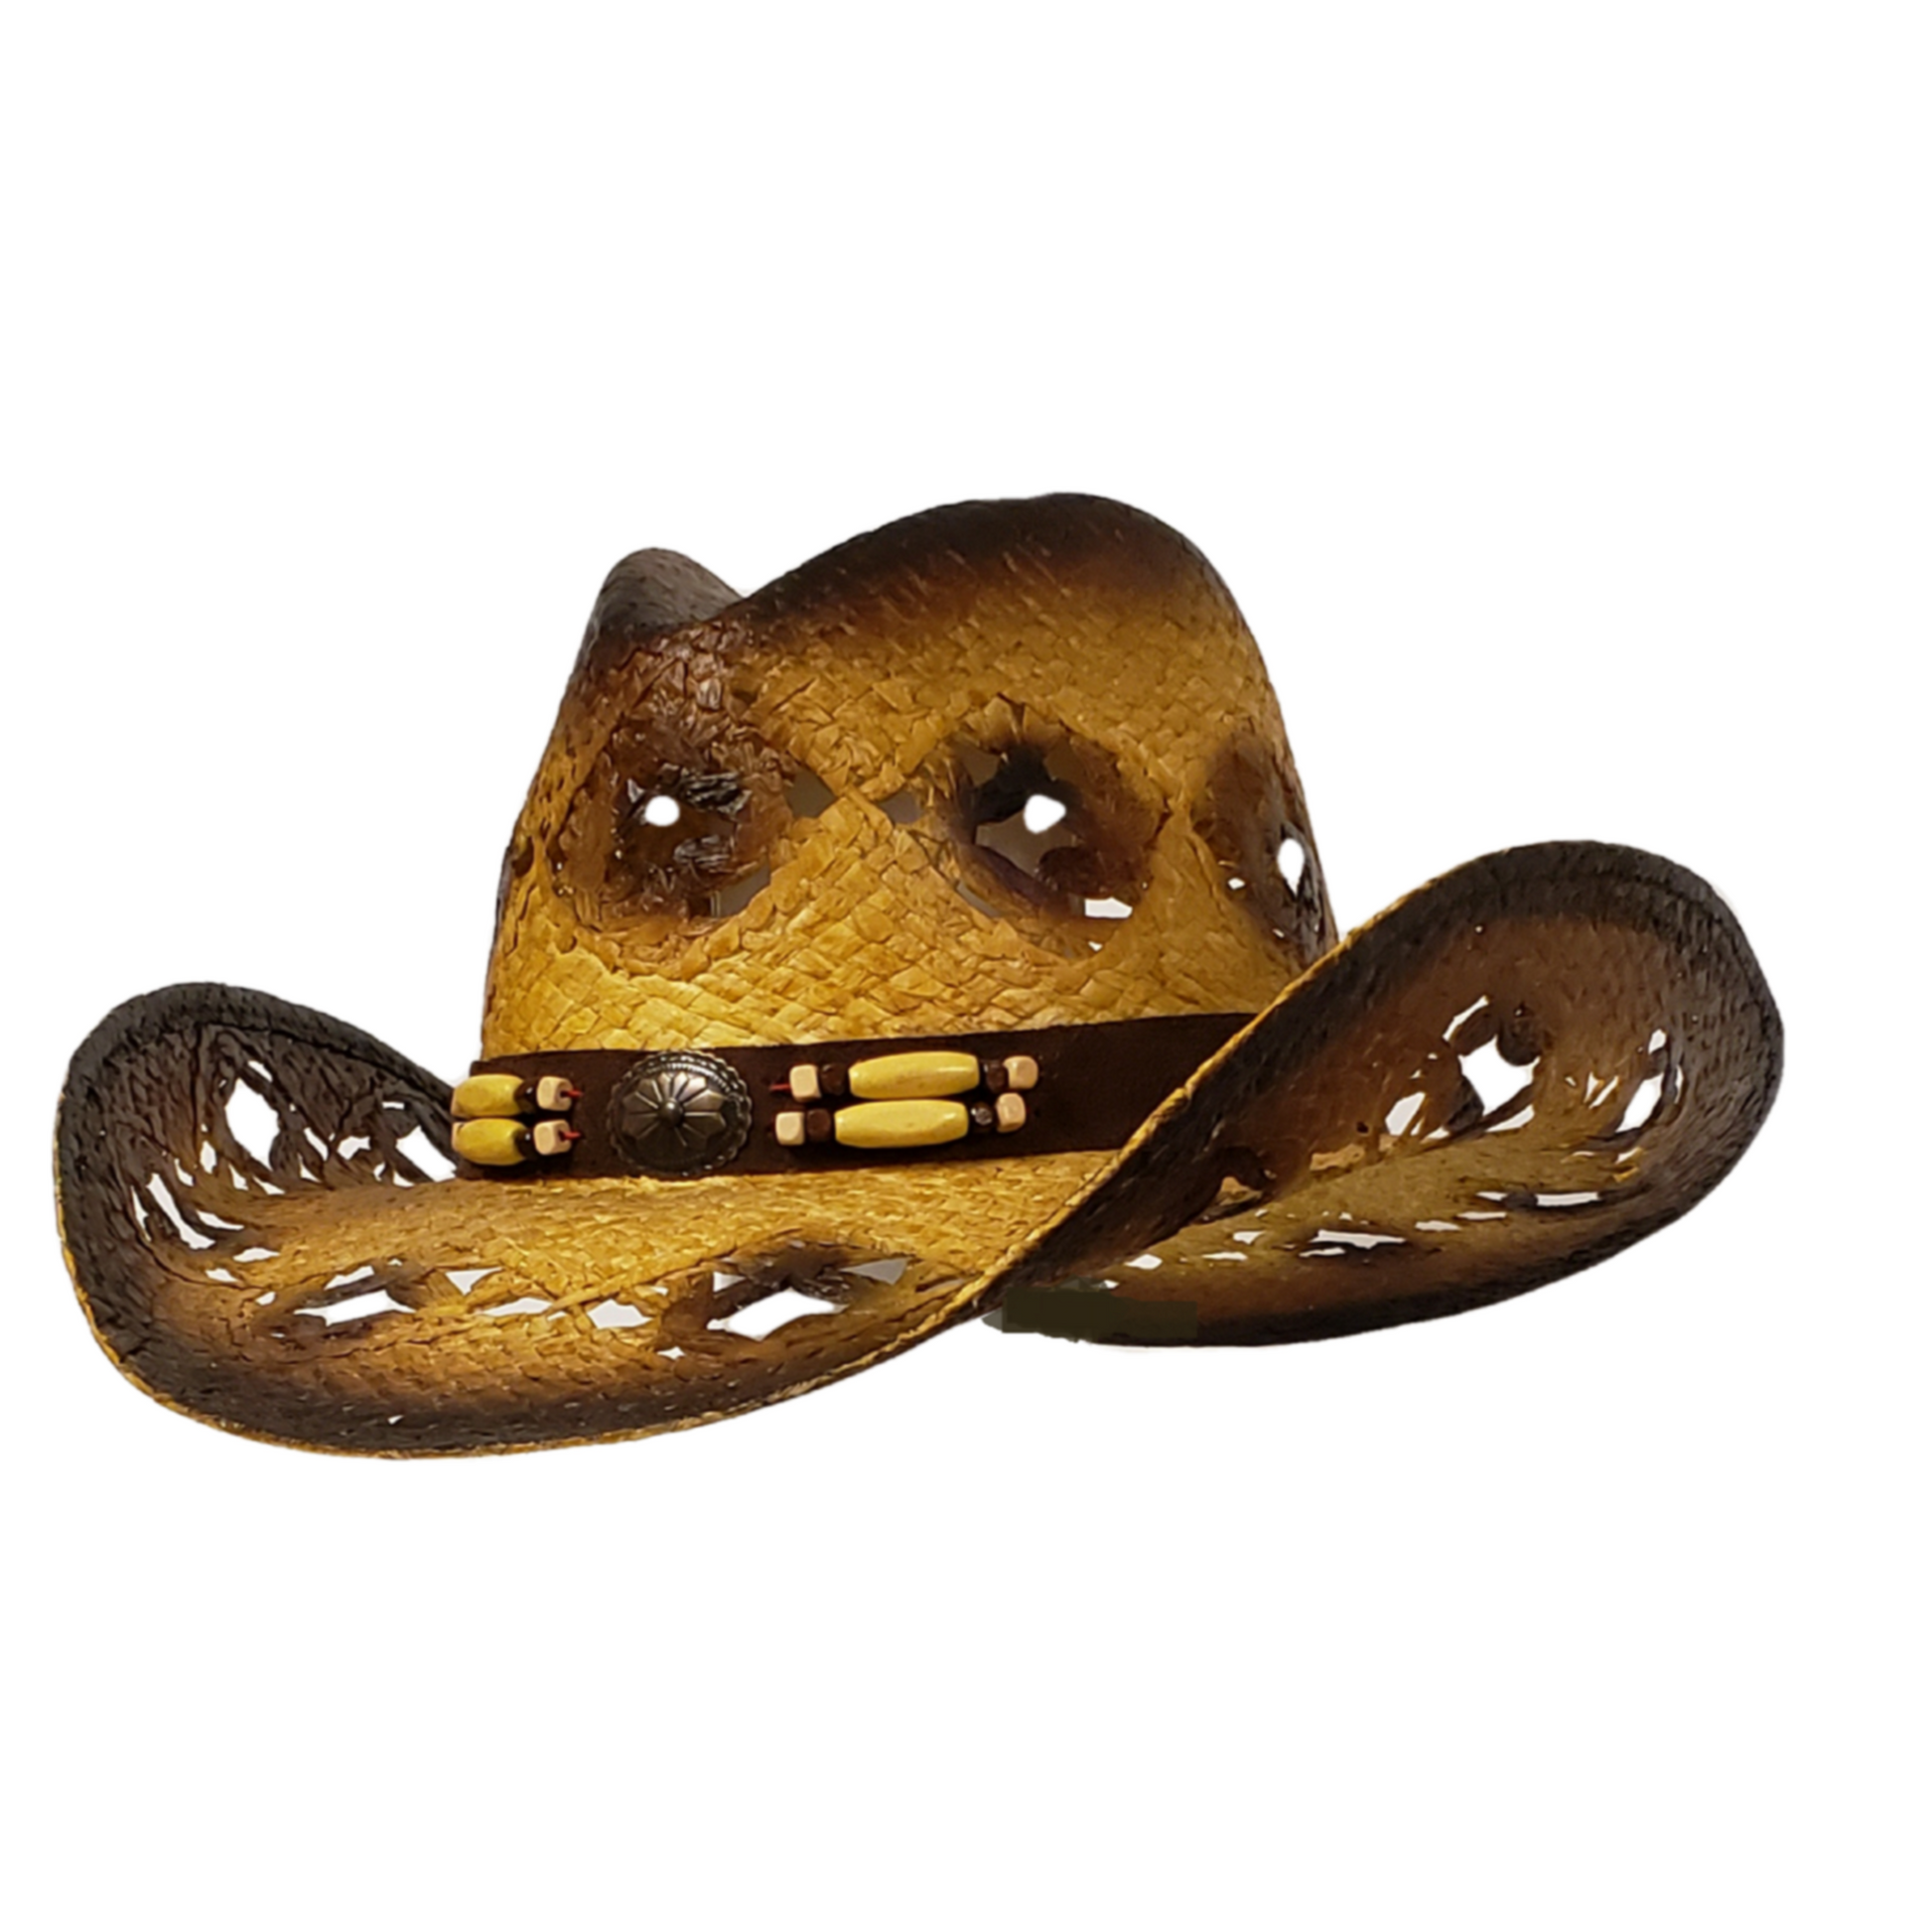 Woven cowboy hat for girls. Gone Country Hats